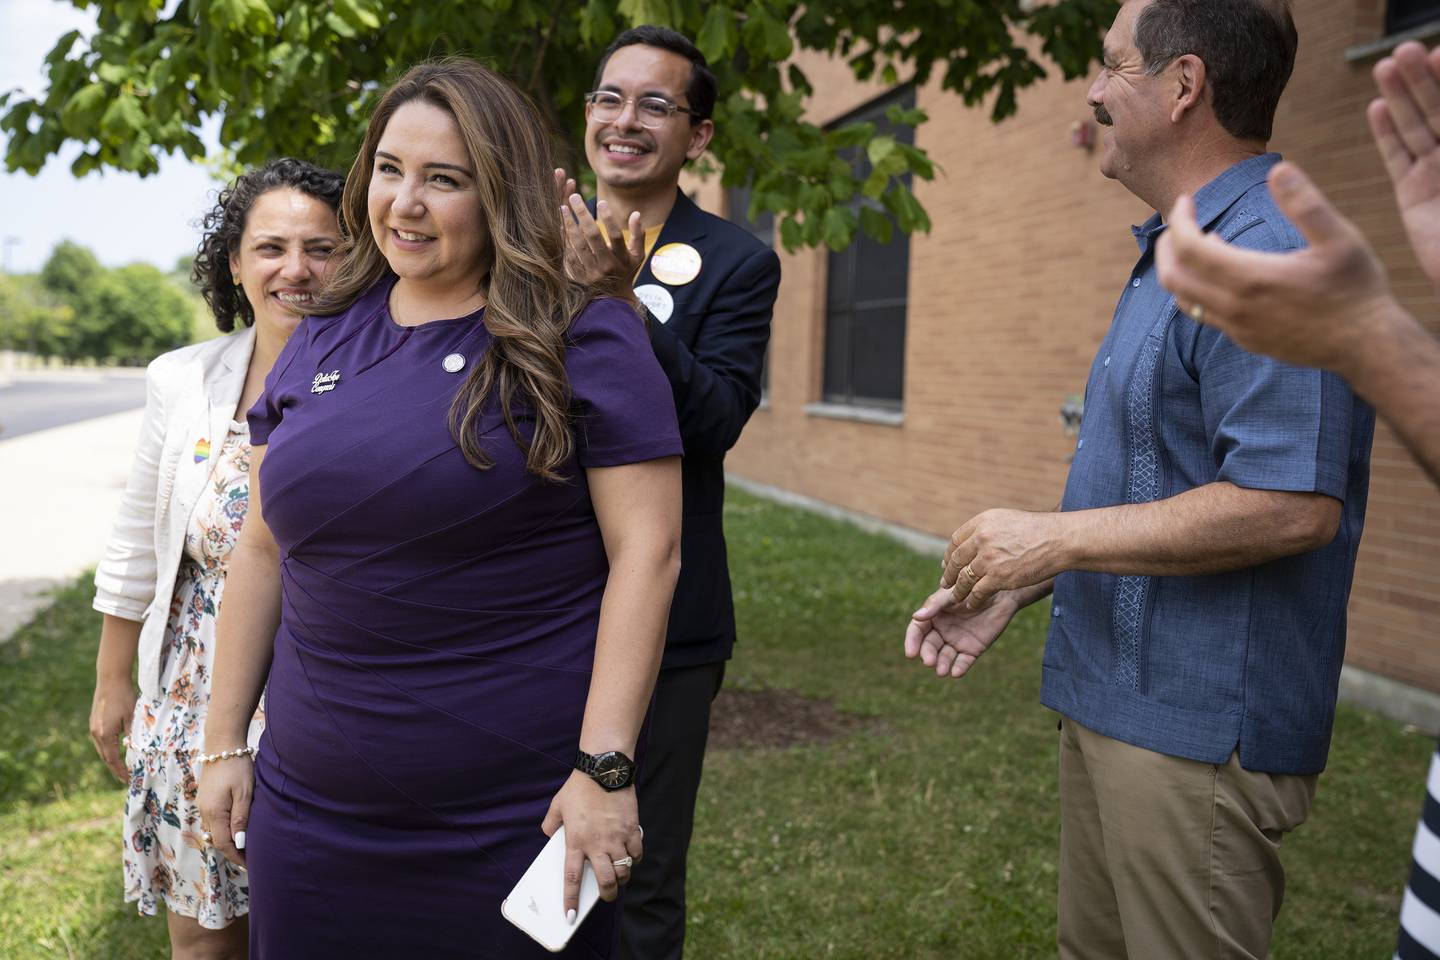 Delia Ramirez, candidate for the Illinois' 3rd Congressional District, is joined by progressive Latino politicians during a stop at Prieto Math and Science Academy in the Belmont Cragin neighborhood on June 28, 2022. U.S. Rep. Jesús "Chuy" García is at right.